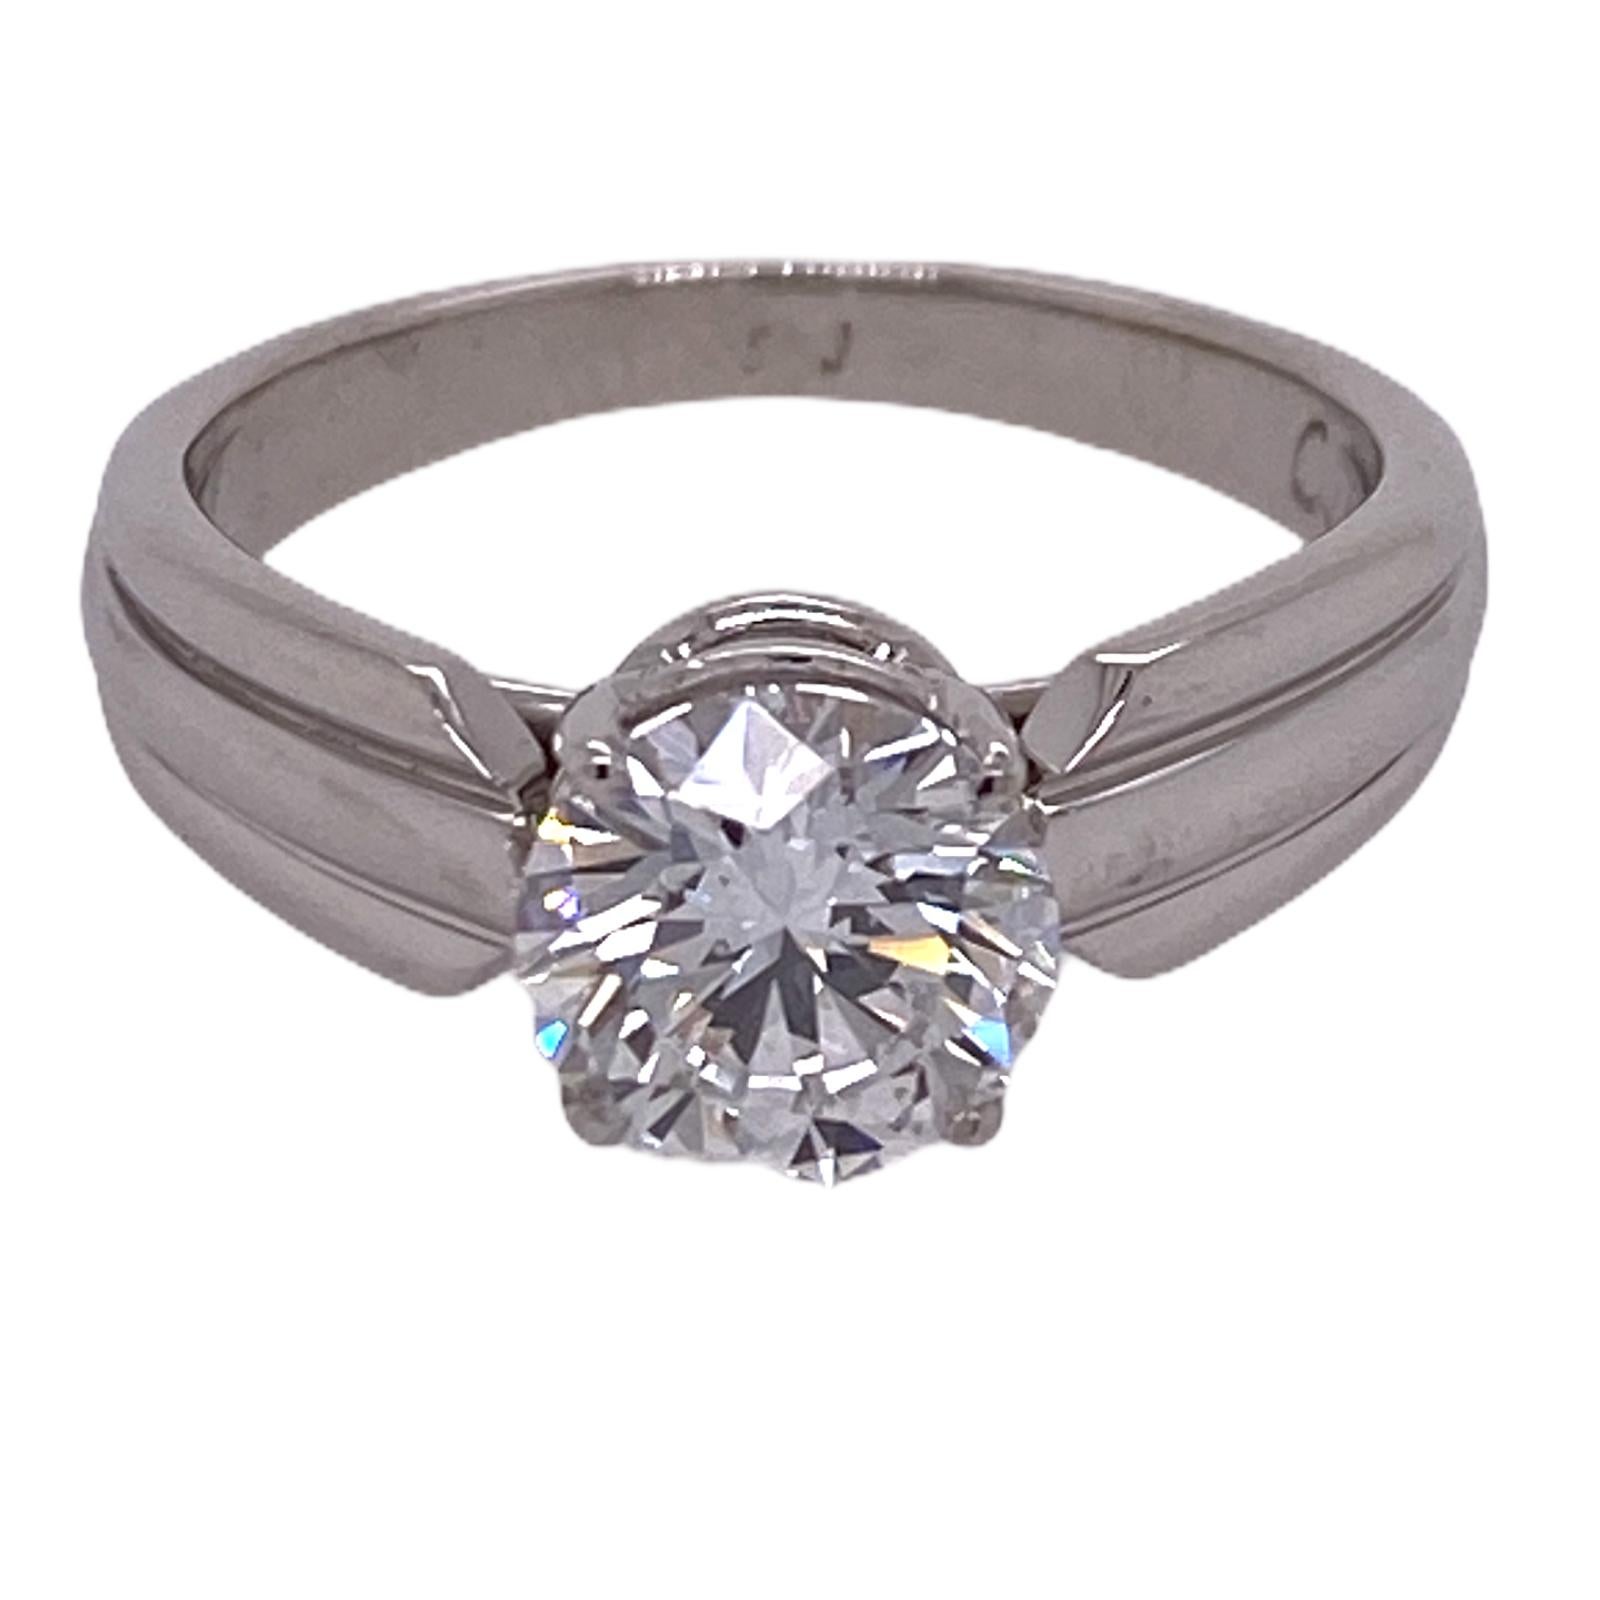 Stunning solitaire diamond engagement ring by Cartier. The round brilliant cut diamond weighs 1.51 carats and is graded E color and VVS2 clarity by the GIA. The certificate and appraisal are in photos. The platinum mounting measures 5mm in width, is